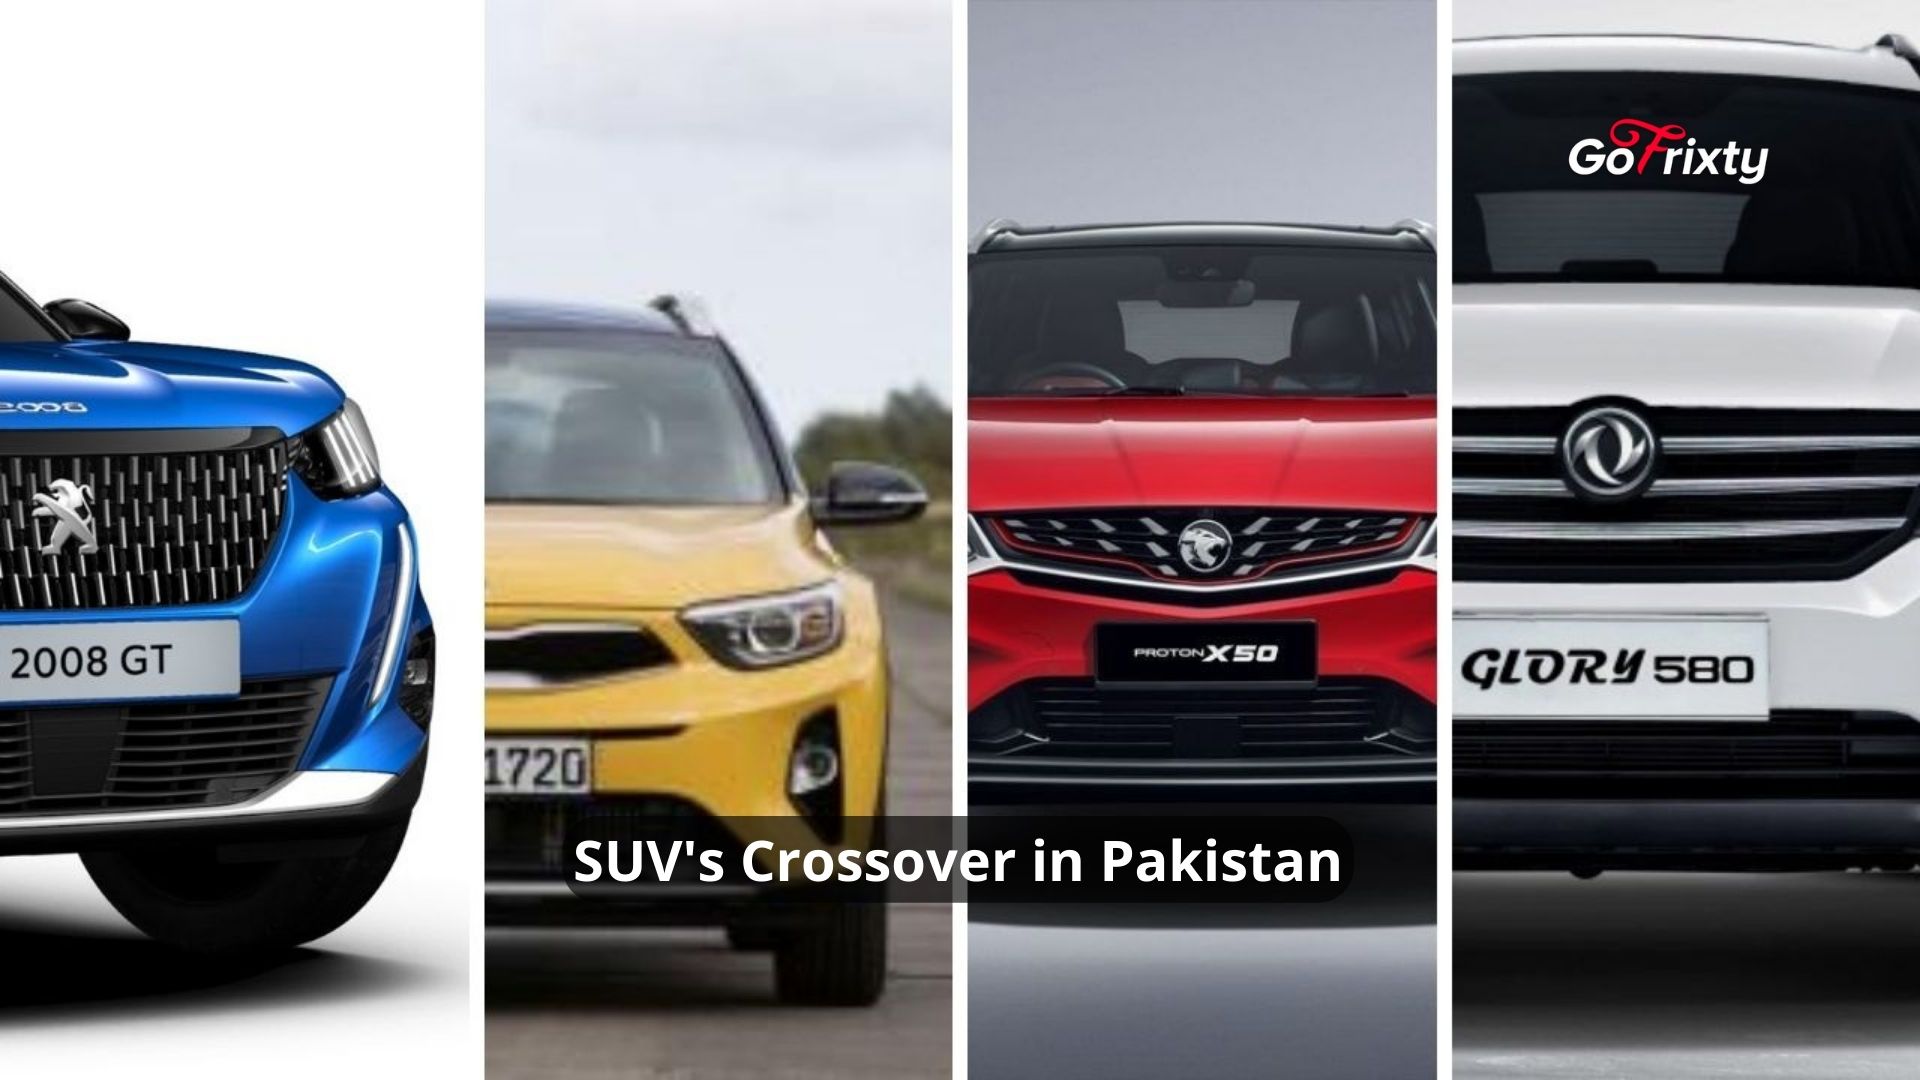 The Battle of SUV's Crossover in Pakistan